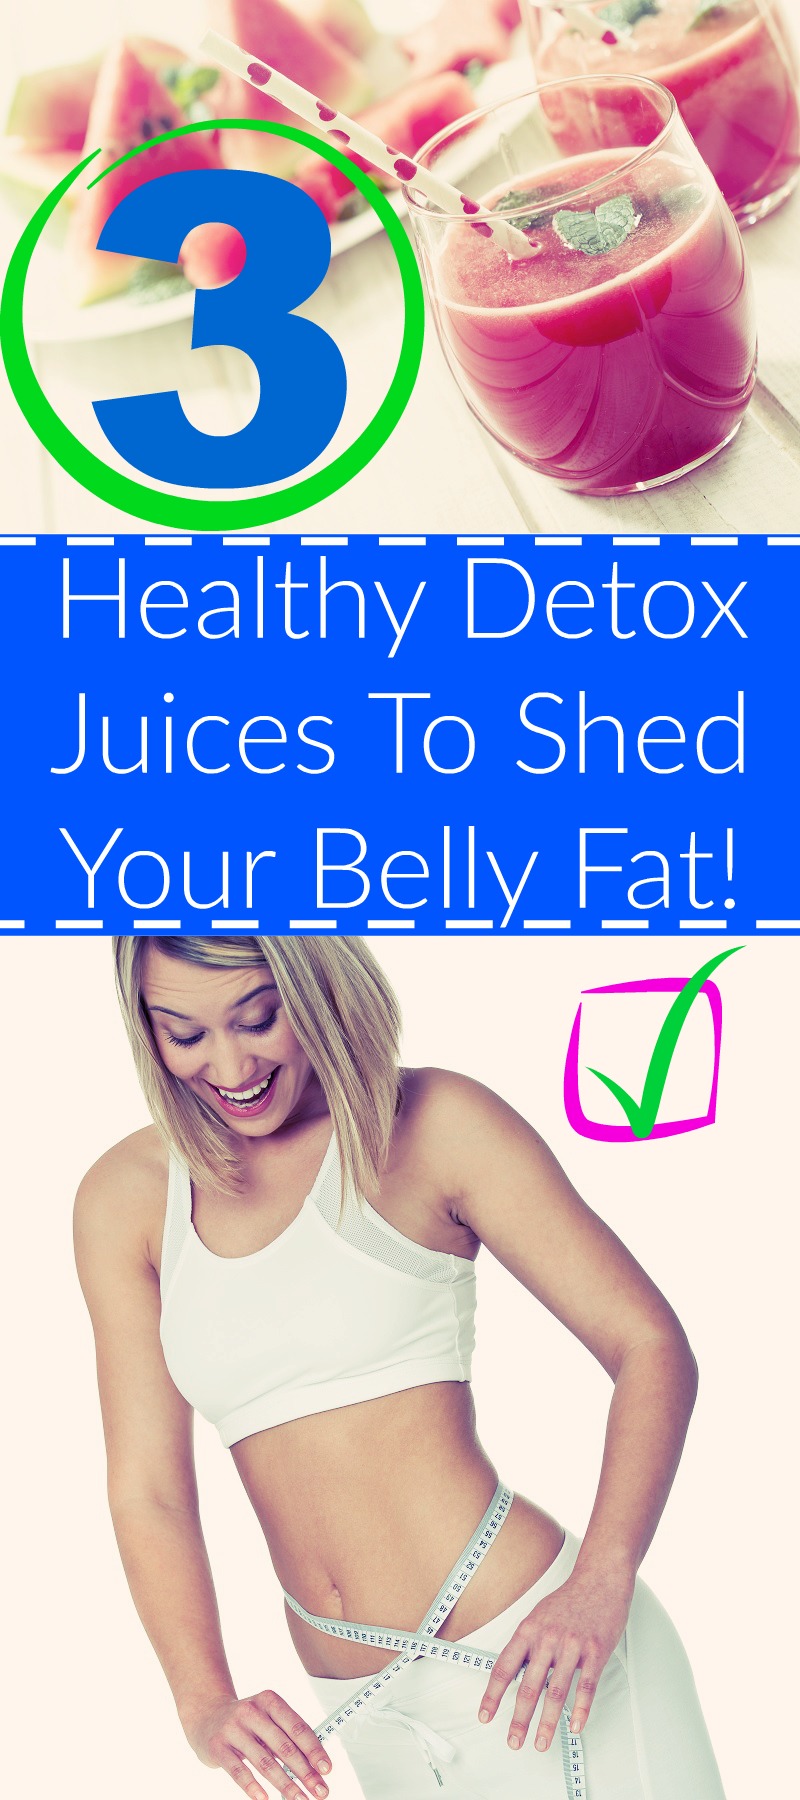 Juices To Shed Belly Fat